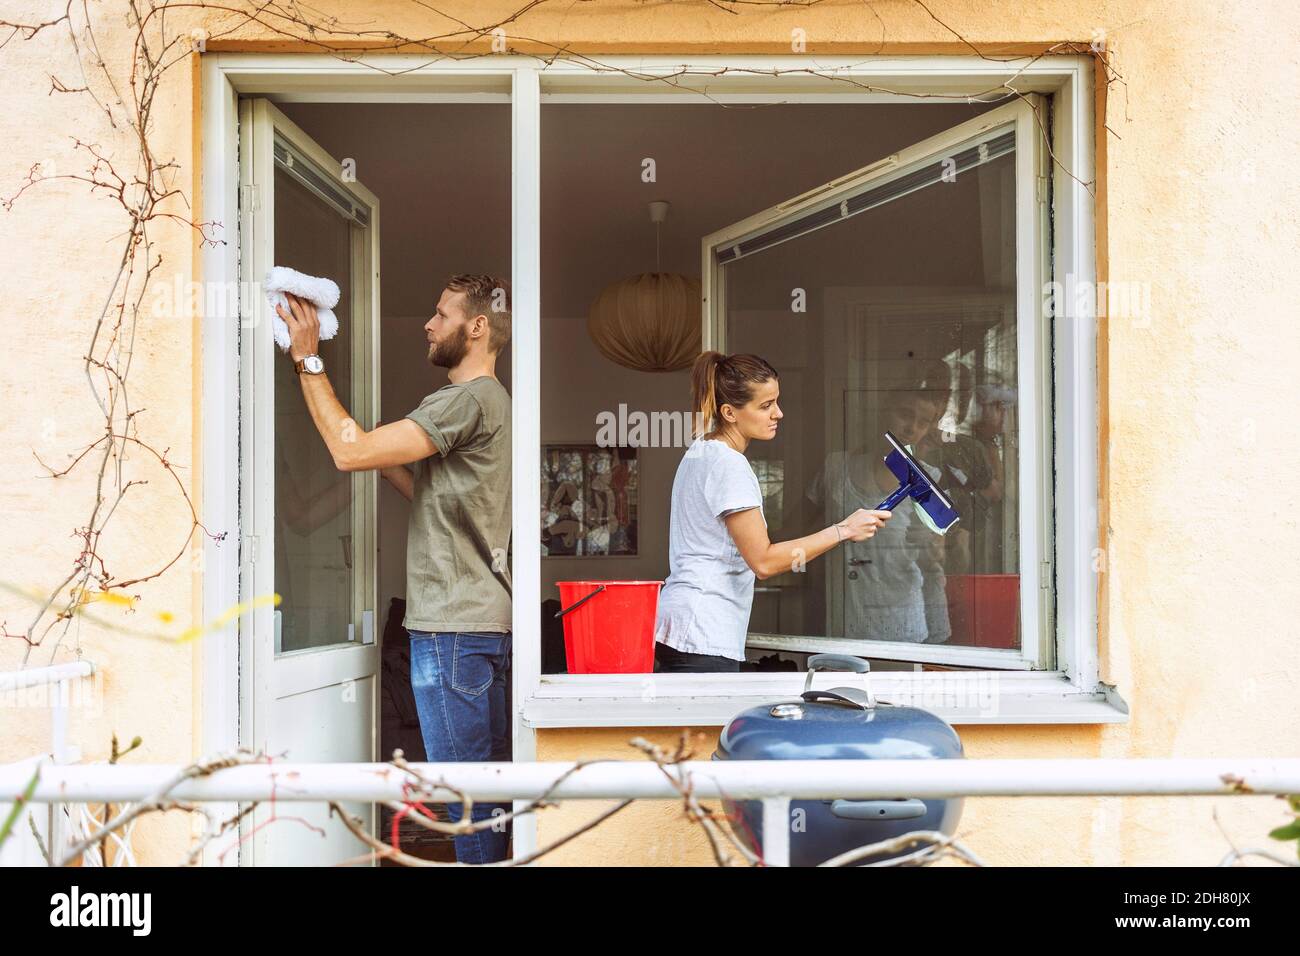 Woman and man cleaning window together Stock Photo